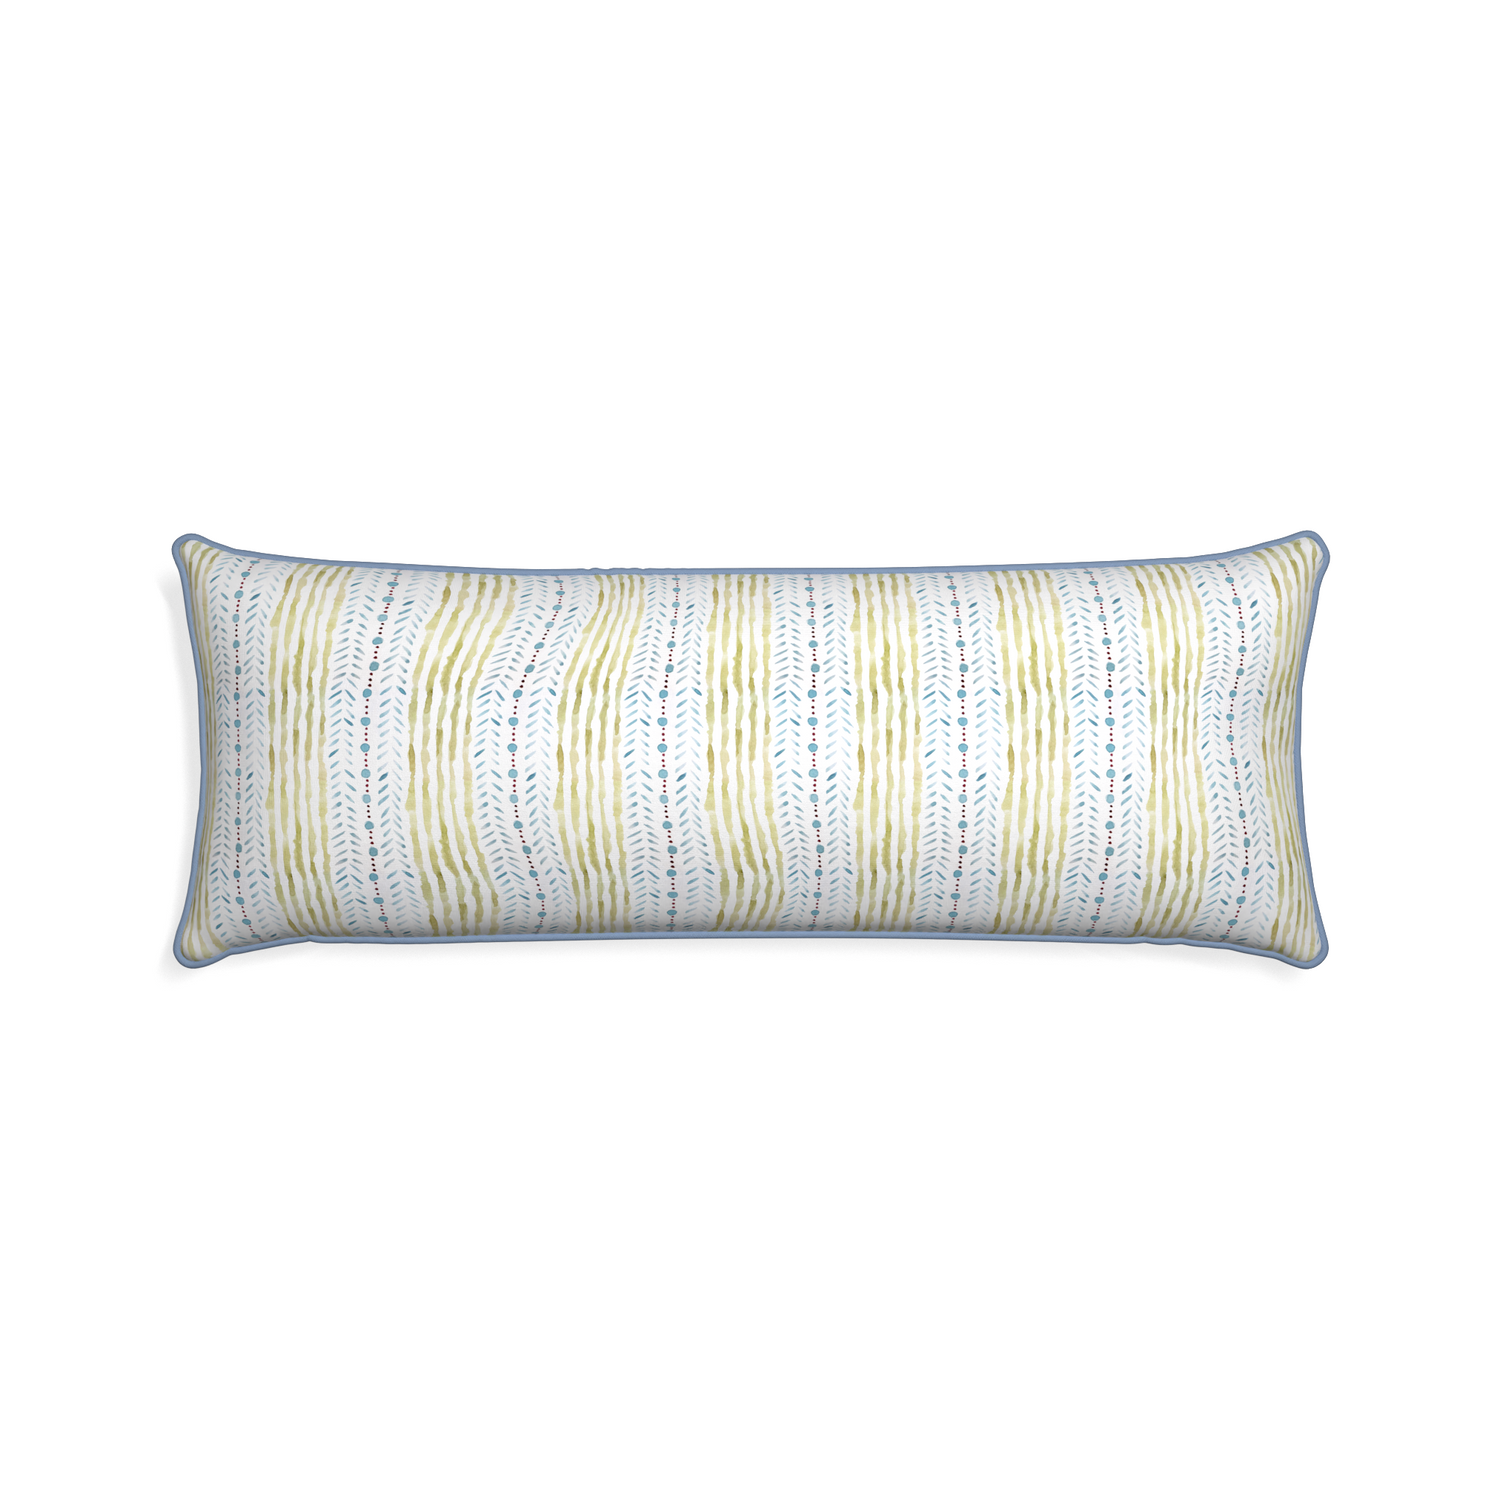 Xl-lumbar julia custom blue & green stripedpillow with sky piping on white background